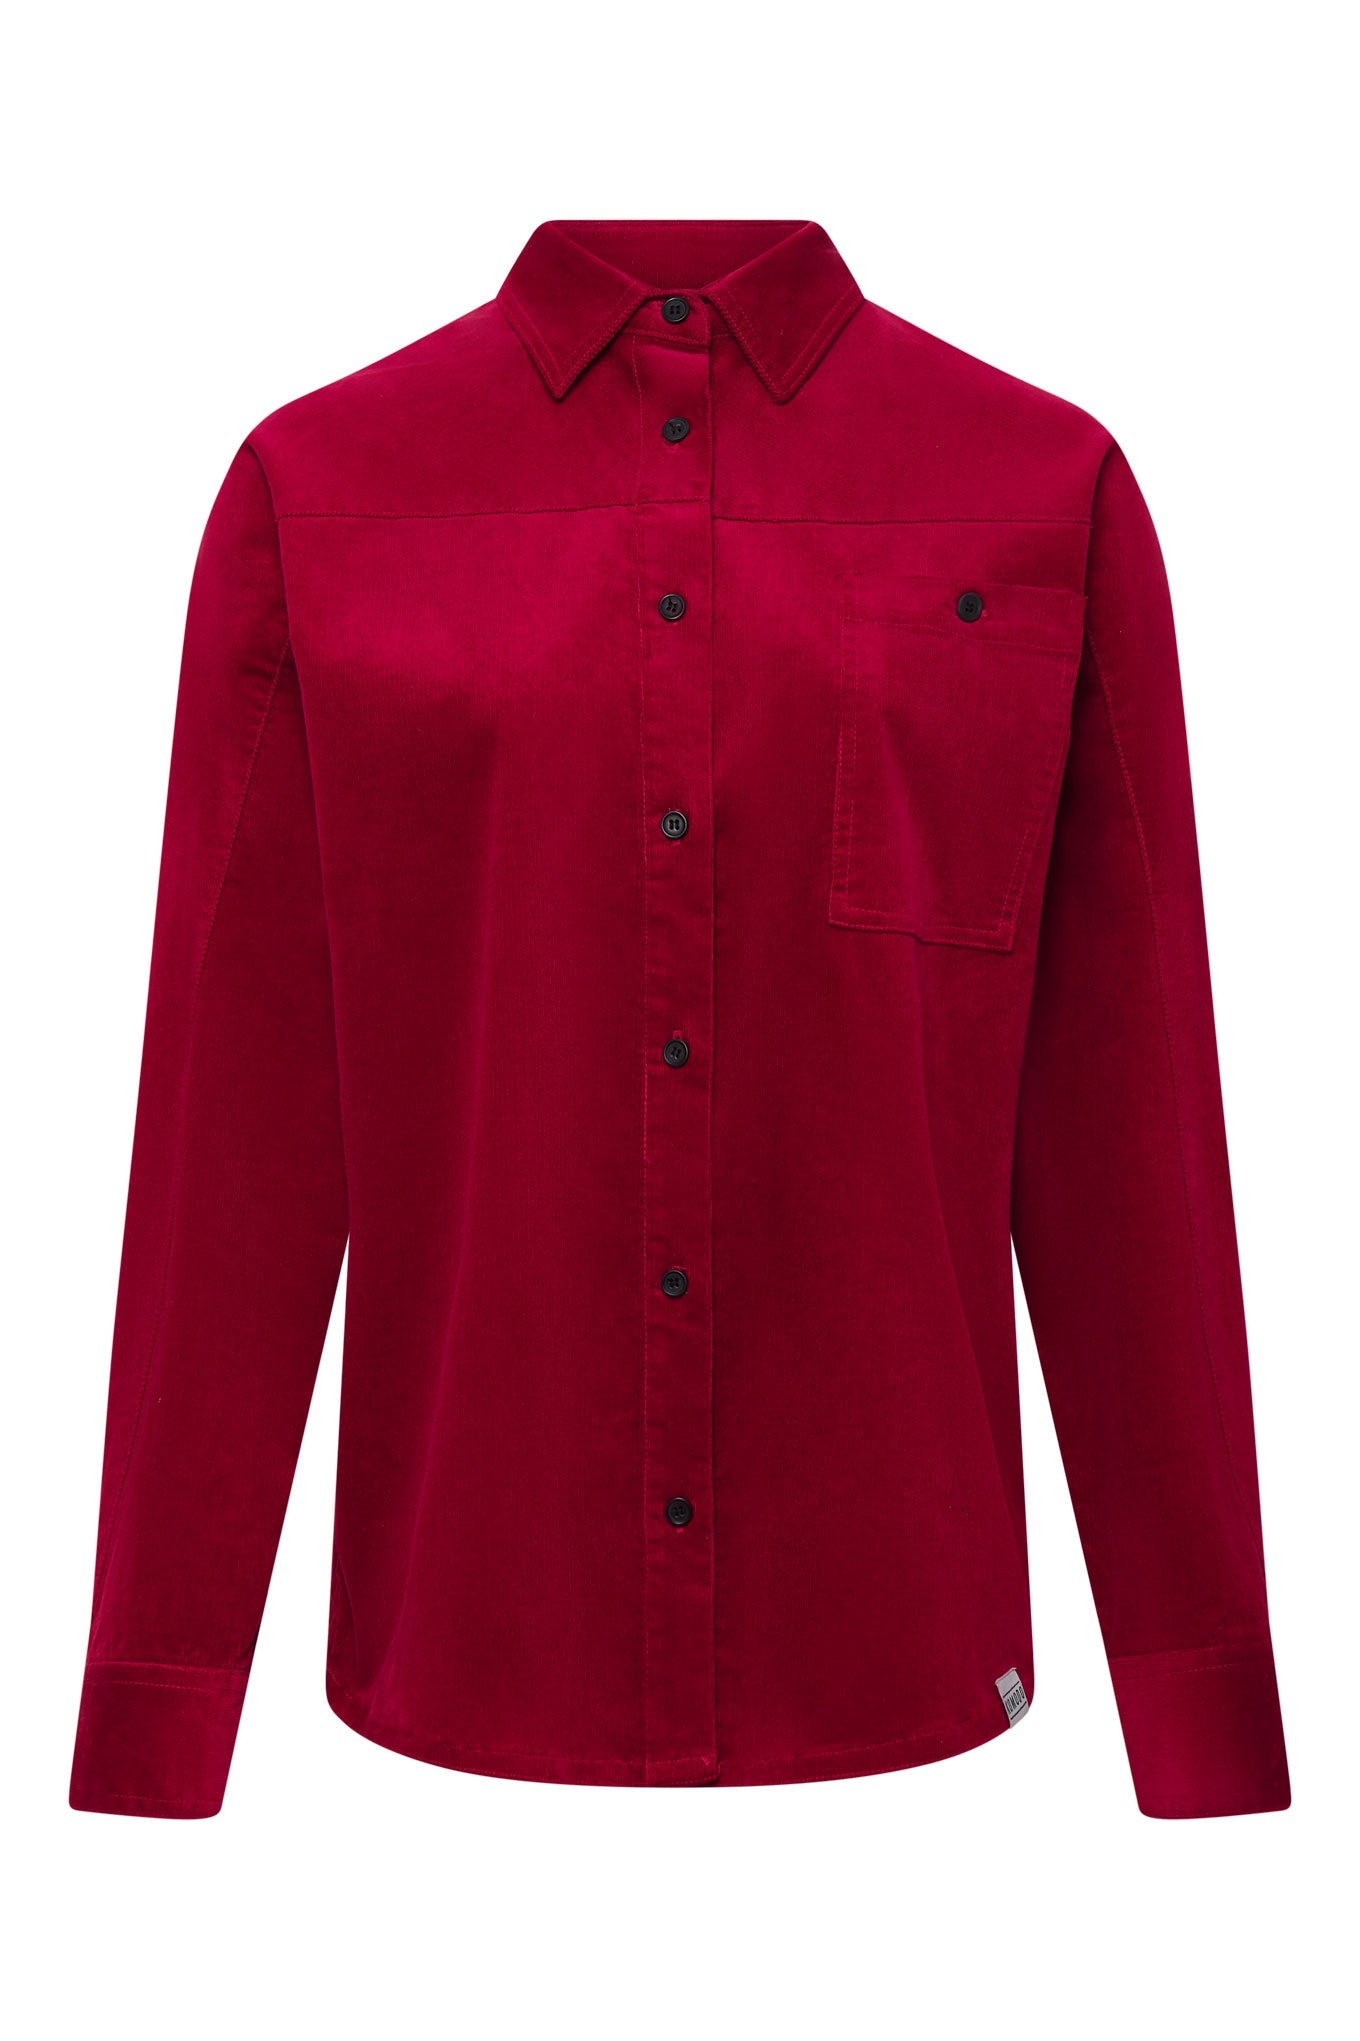 Red, long-sleeved corduroy shirt MIDNIGHT made of organic cotton by Komodo